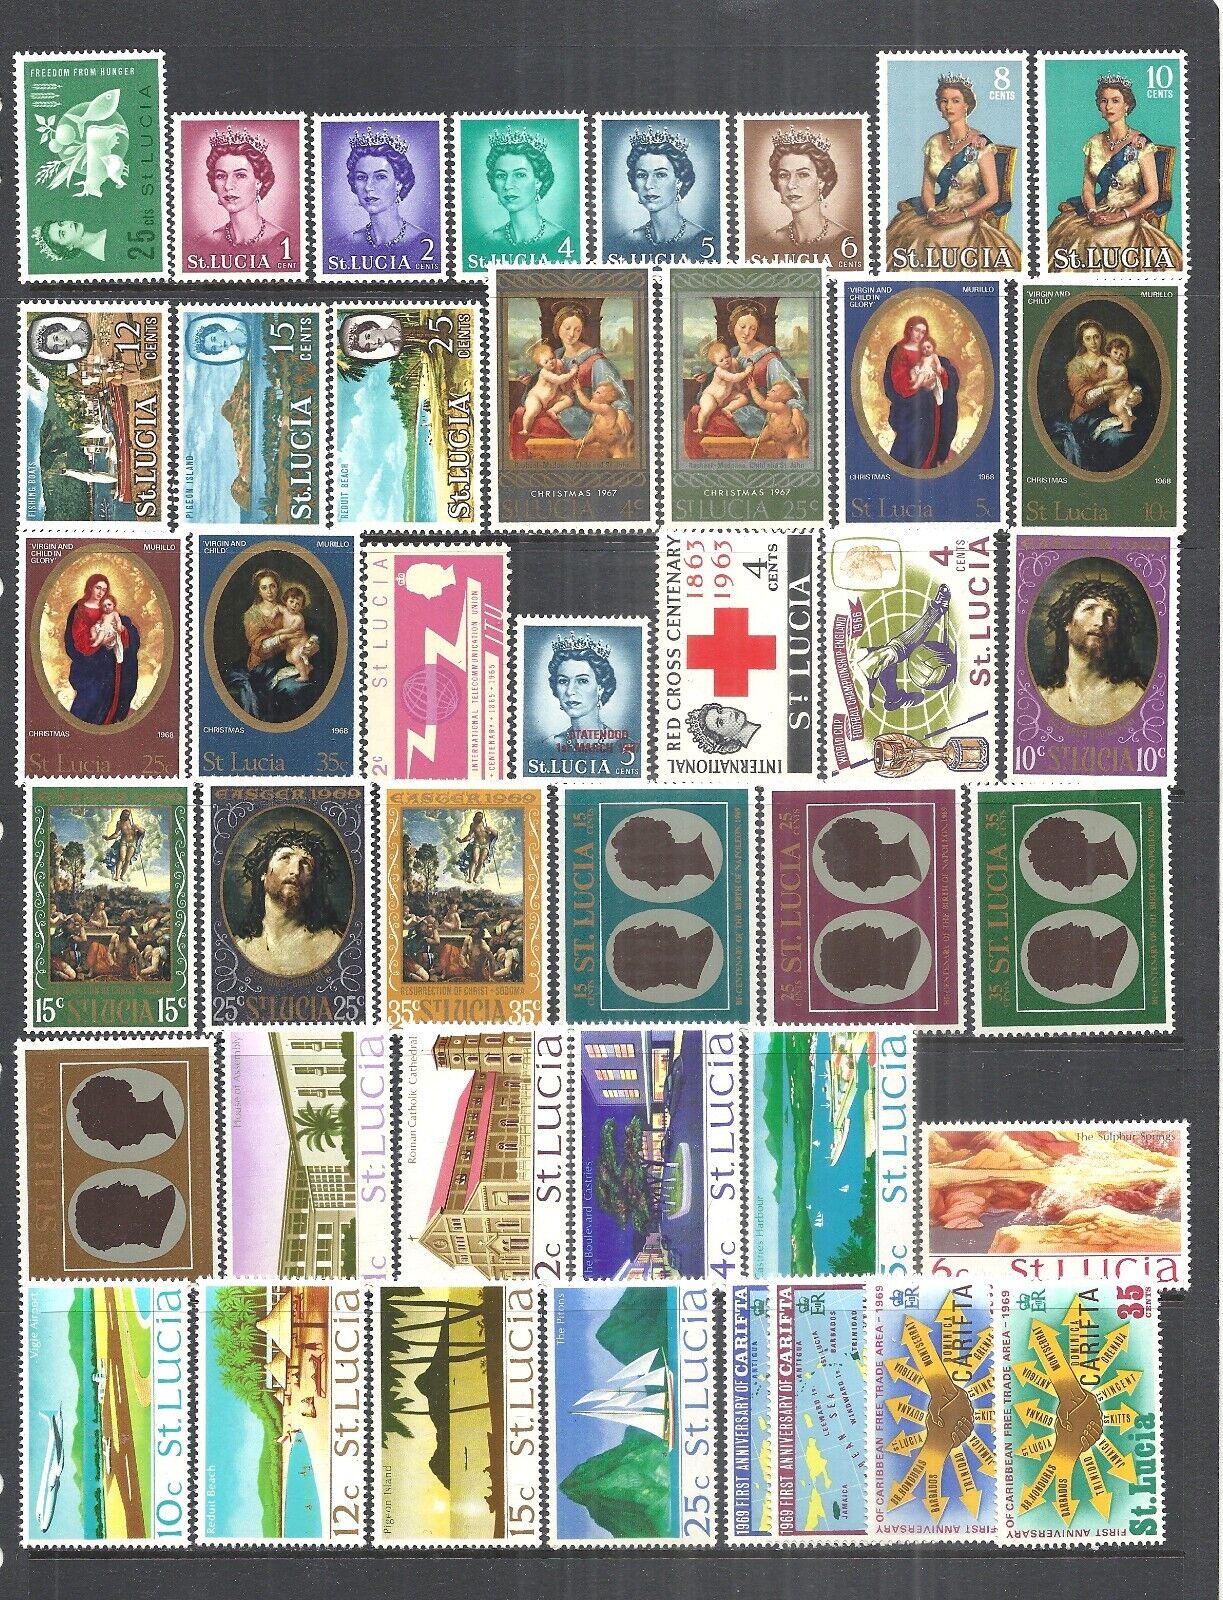 ST. LUCIA     VARIOUS MINT HINGED ISSUES      1963 - 1973